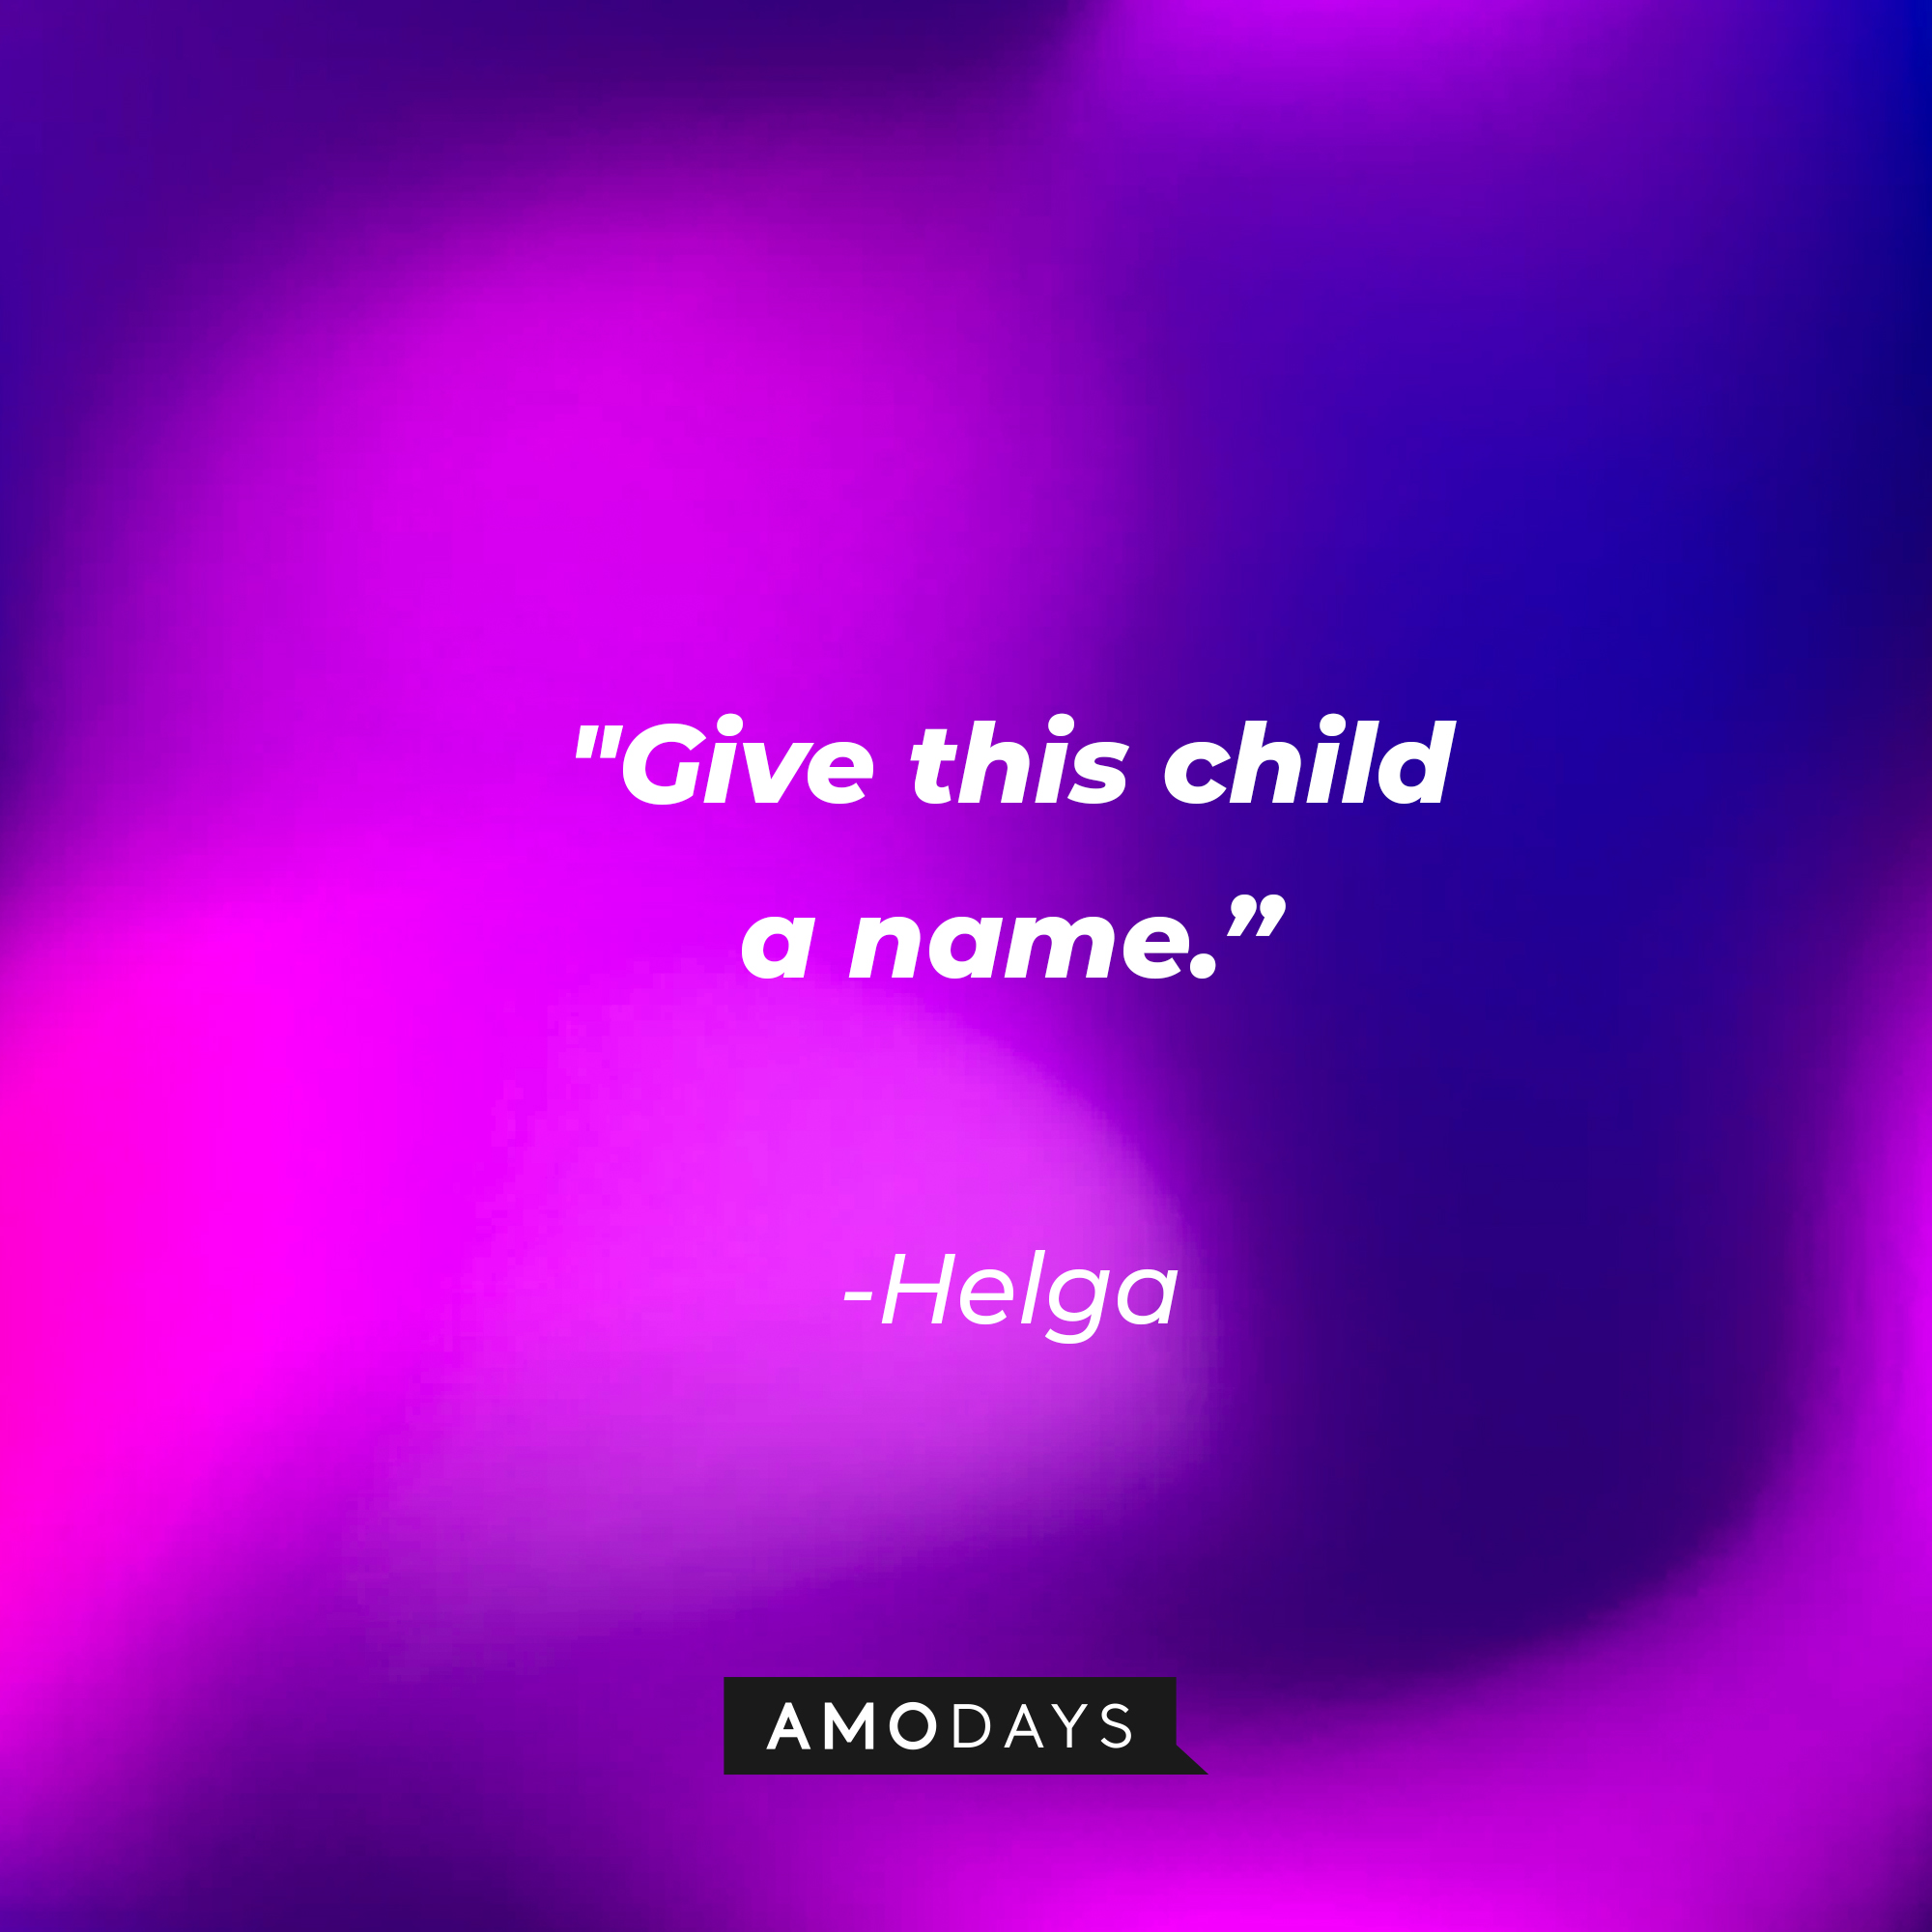 Helga’s quote: "Give this child a name.” | Source: Amodays